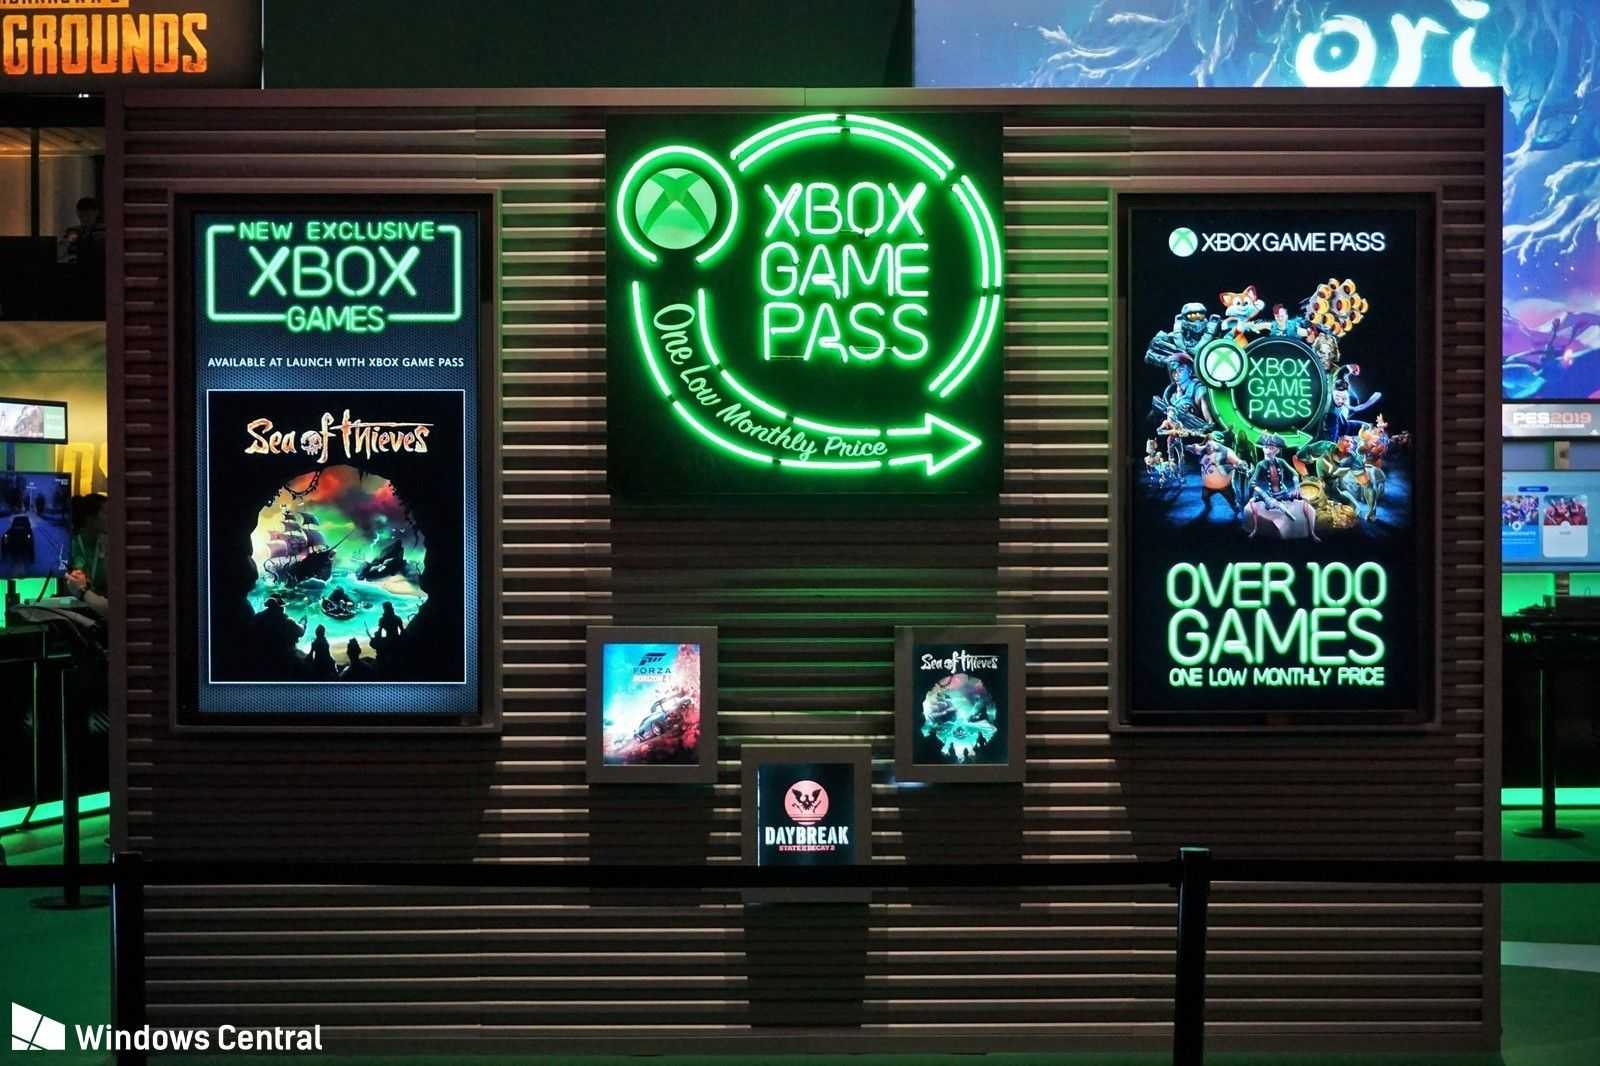 xbox game pass ultimate on pc